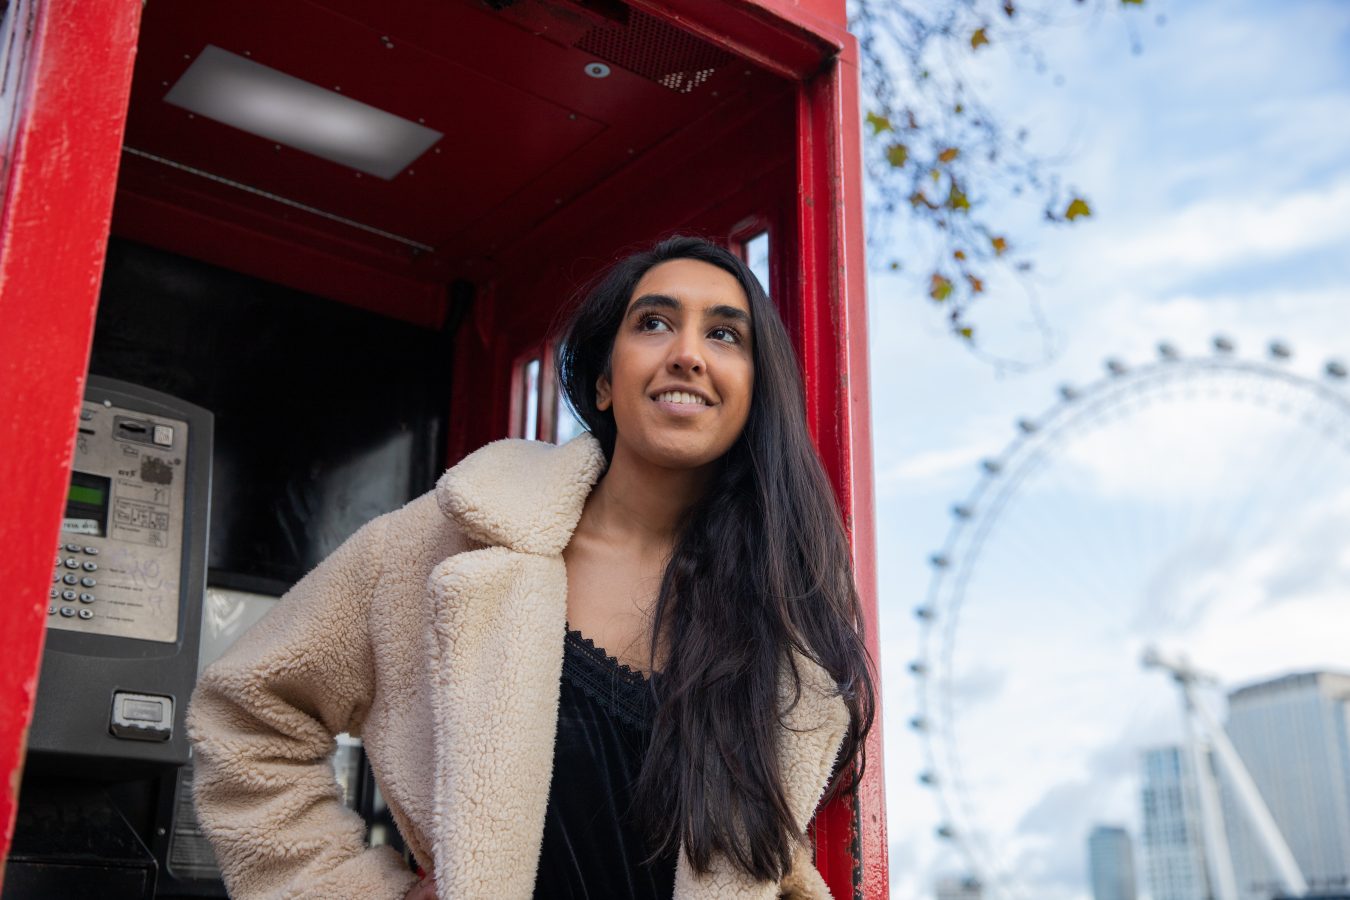 F1 visa student traveler poses in London telephone box with London Eye in the background.